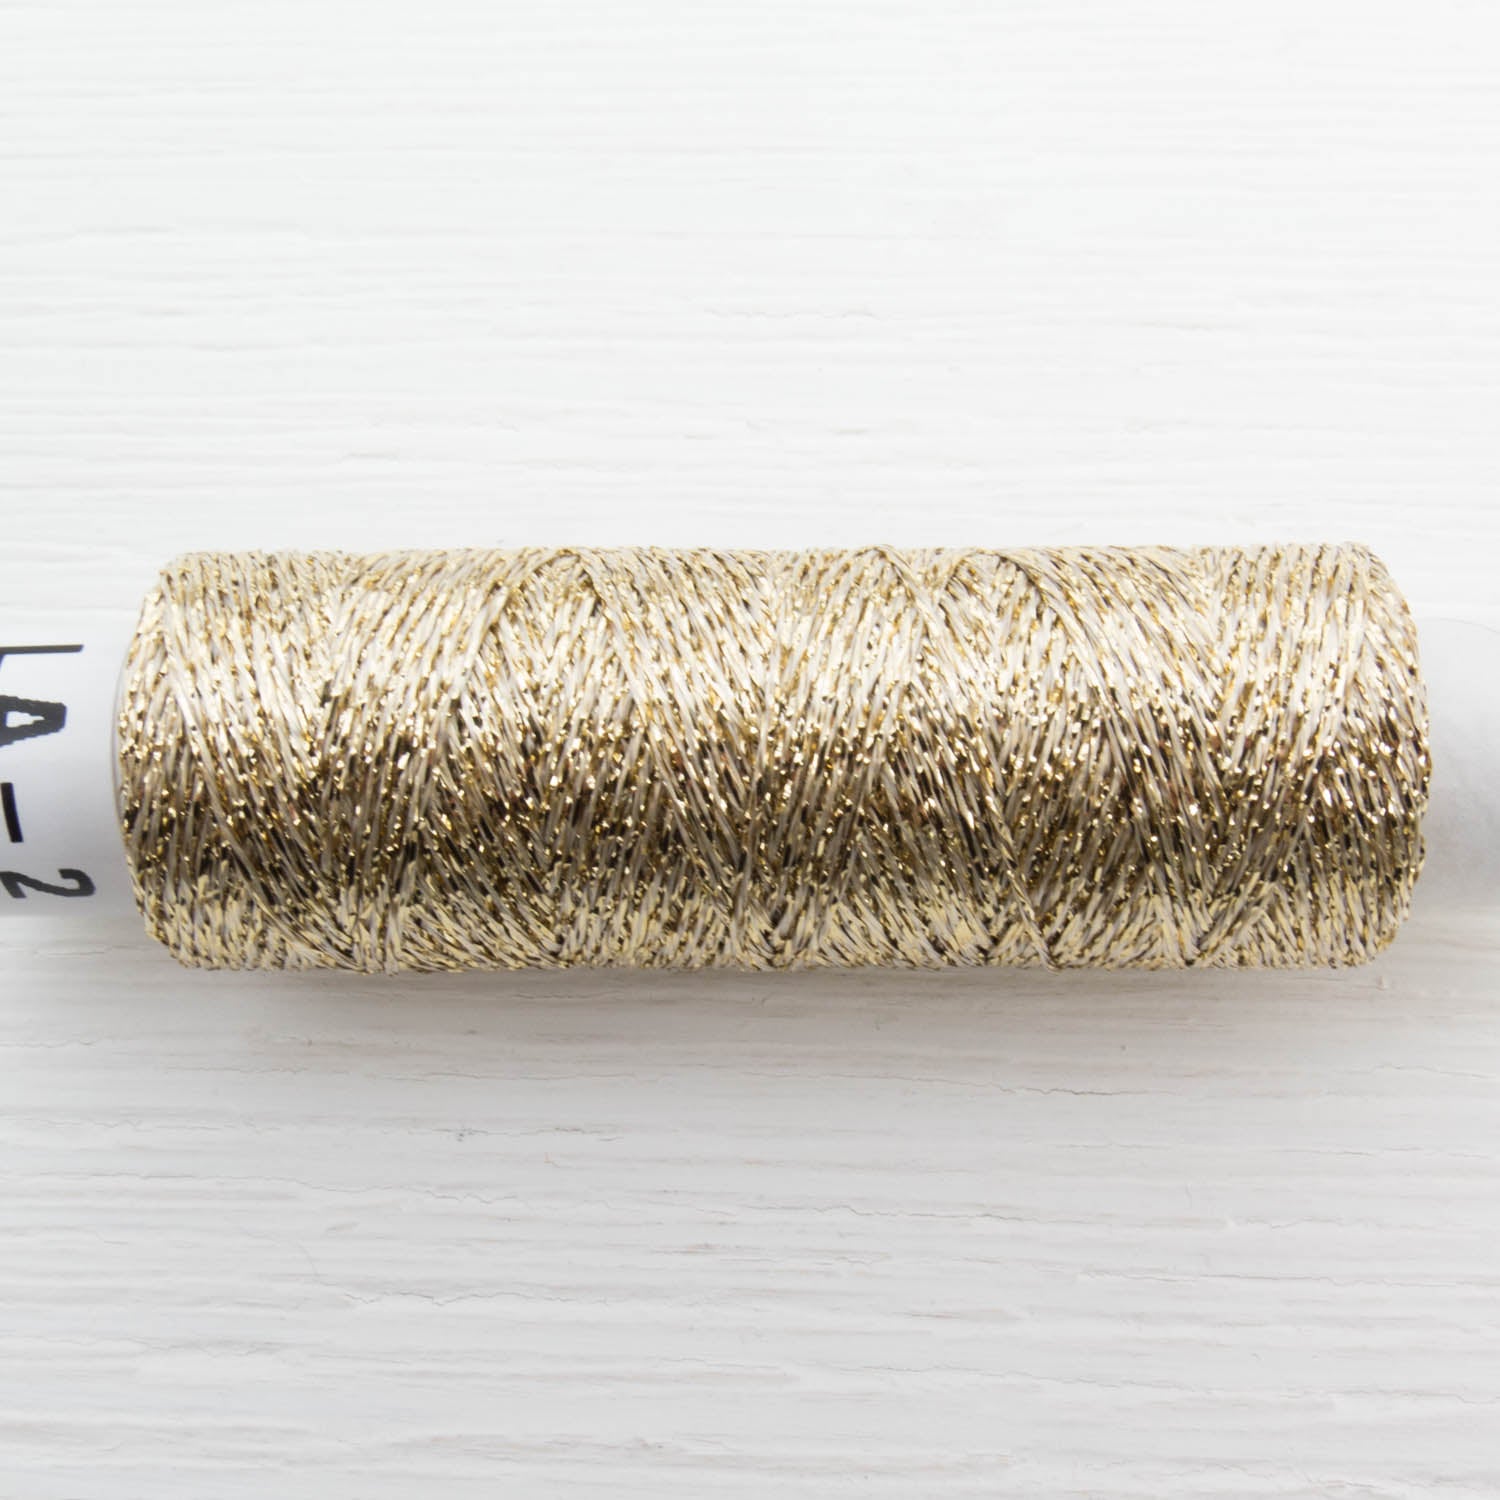 Metallic Embroidery Floss - Gold